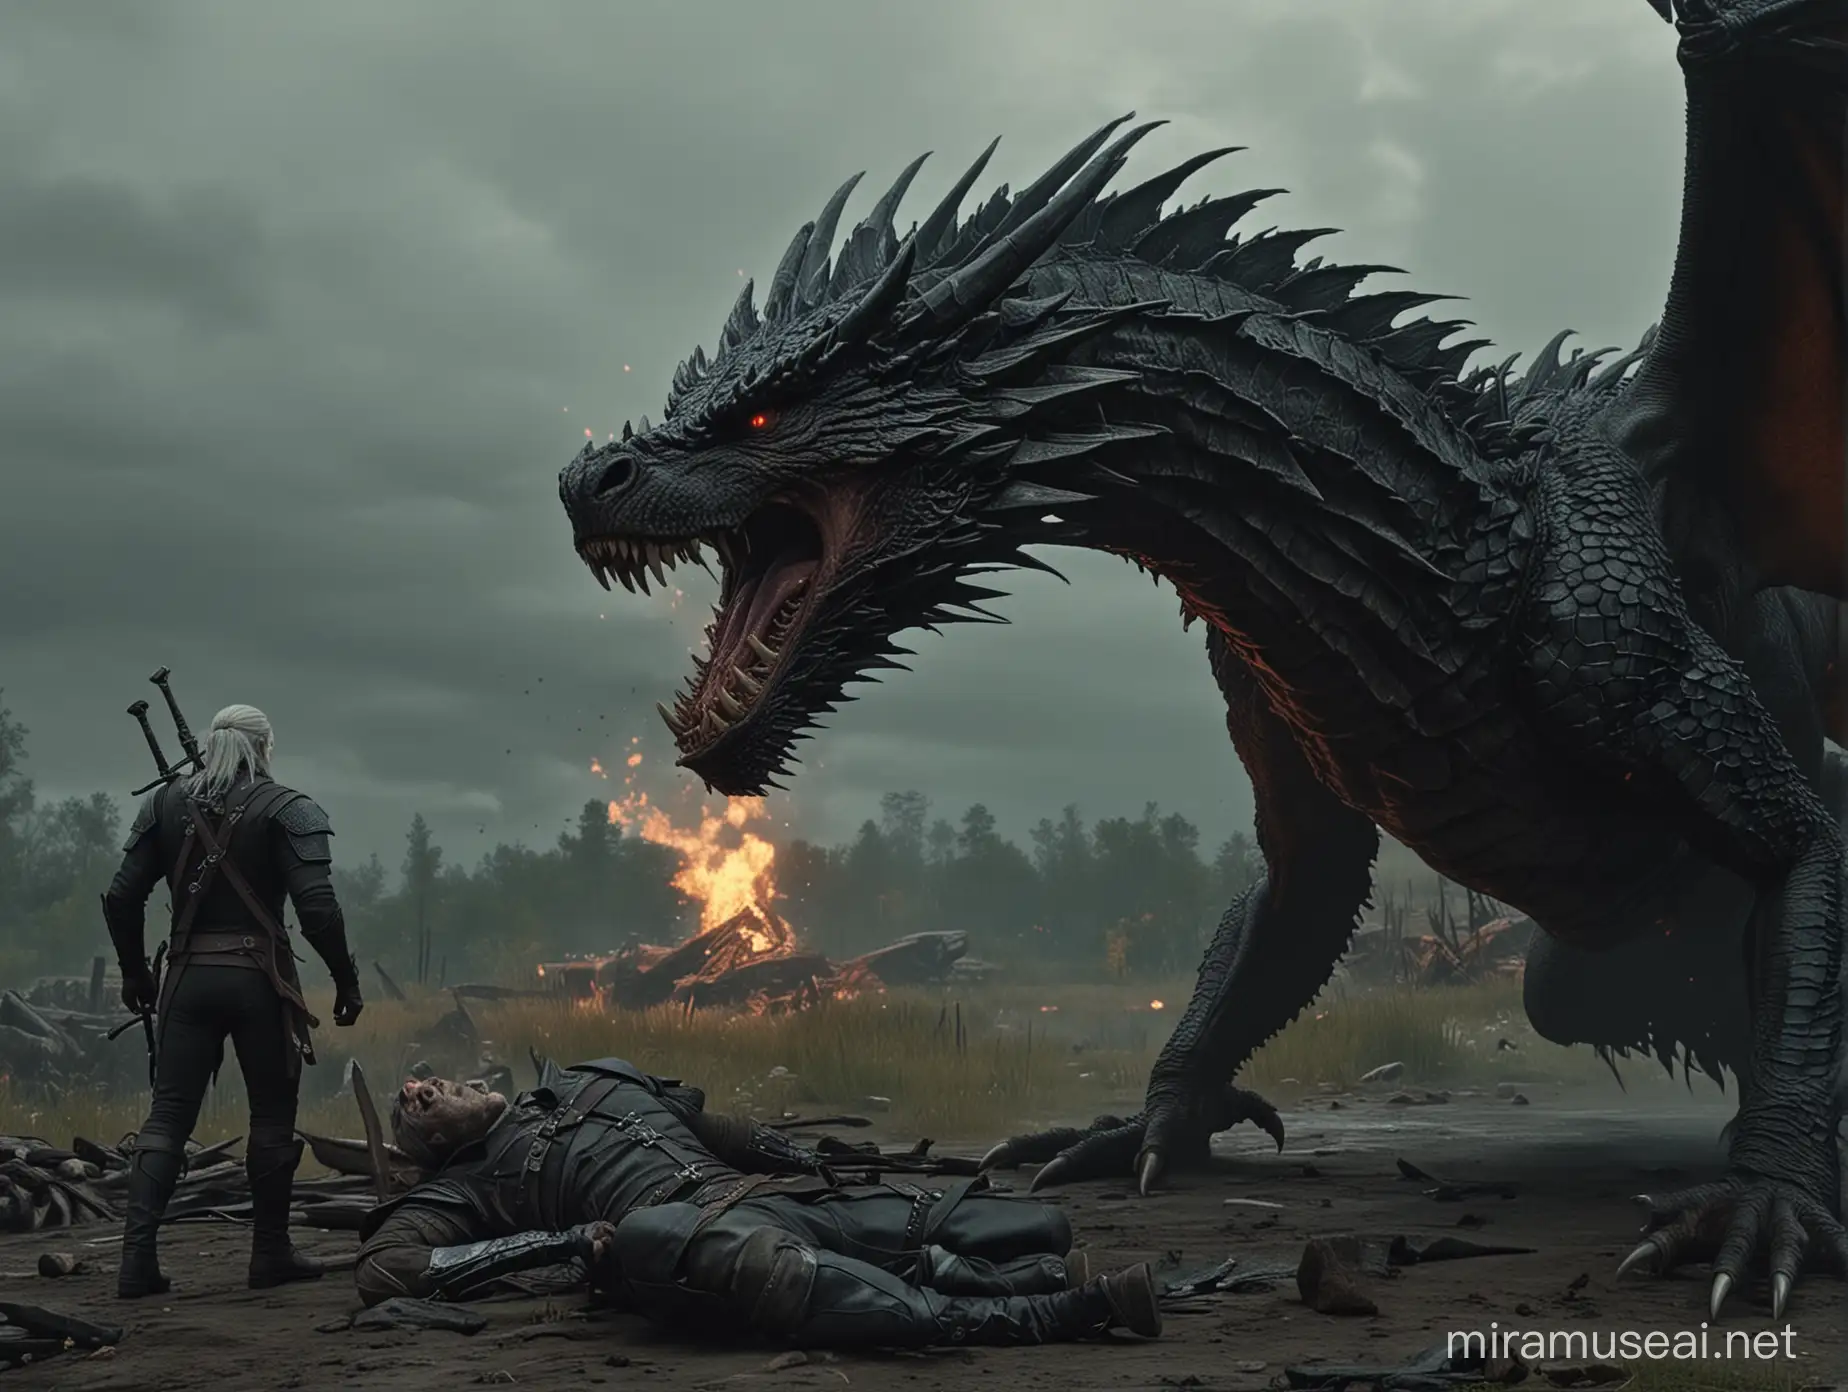 The Witcher Battles a Ferocious Dragon in Gory Combat